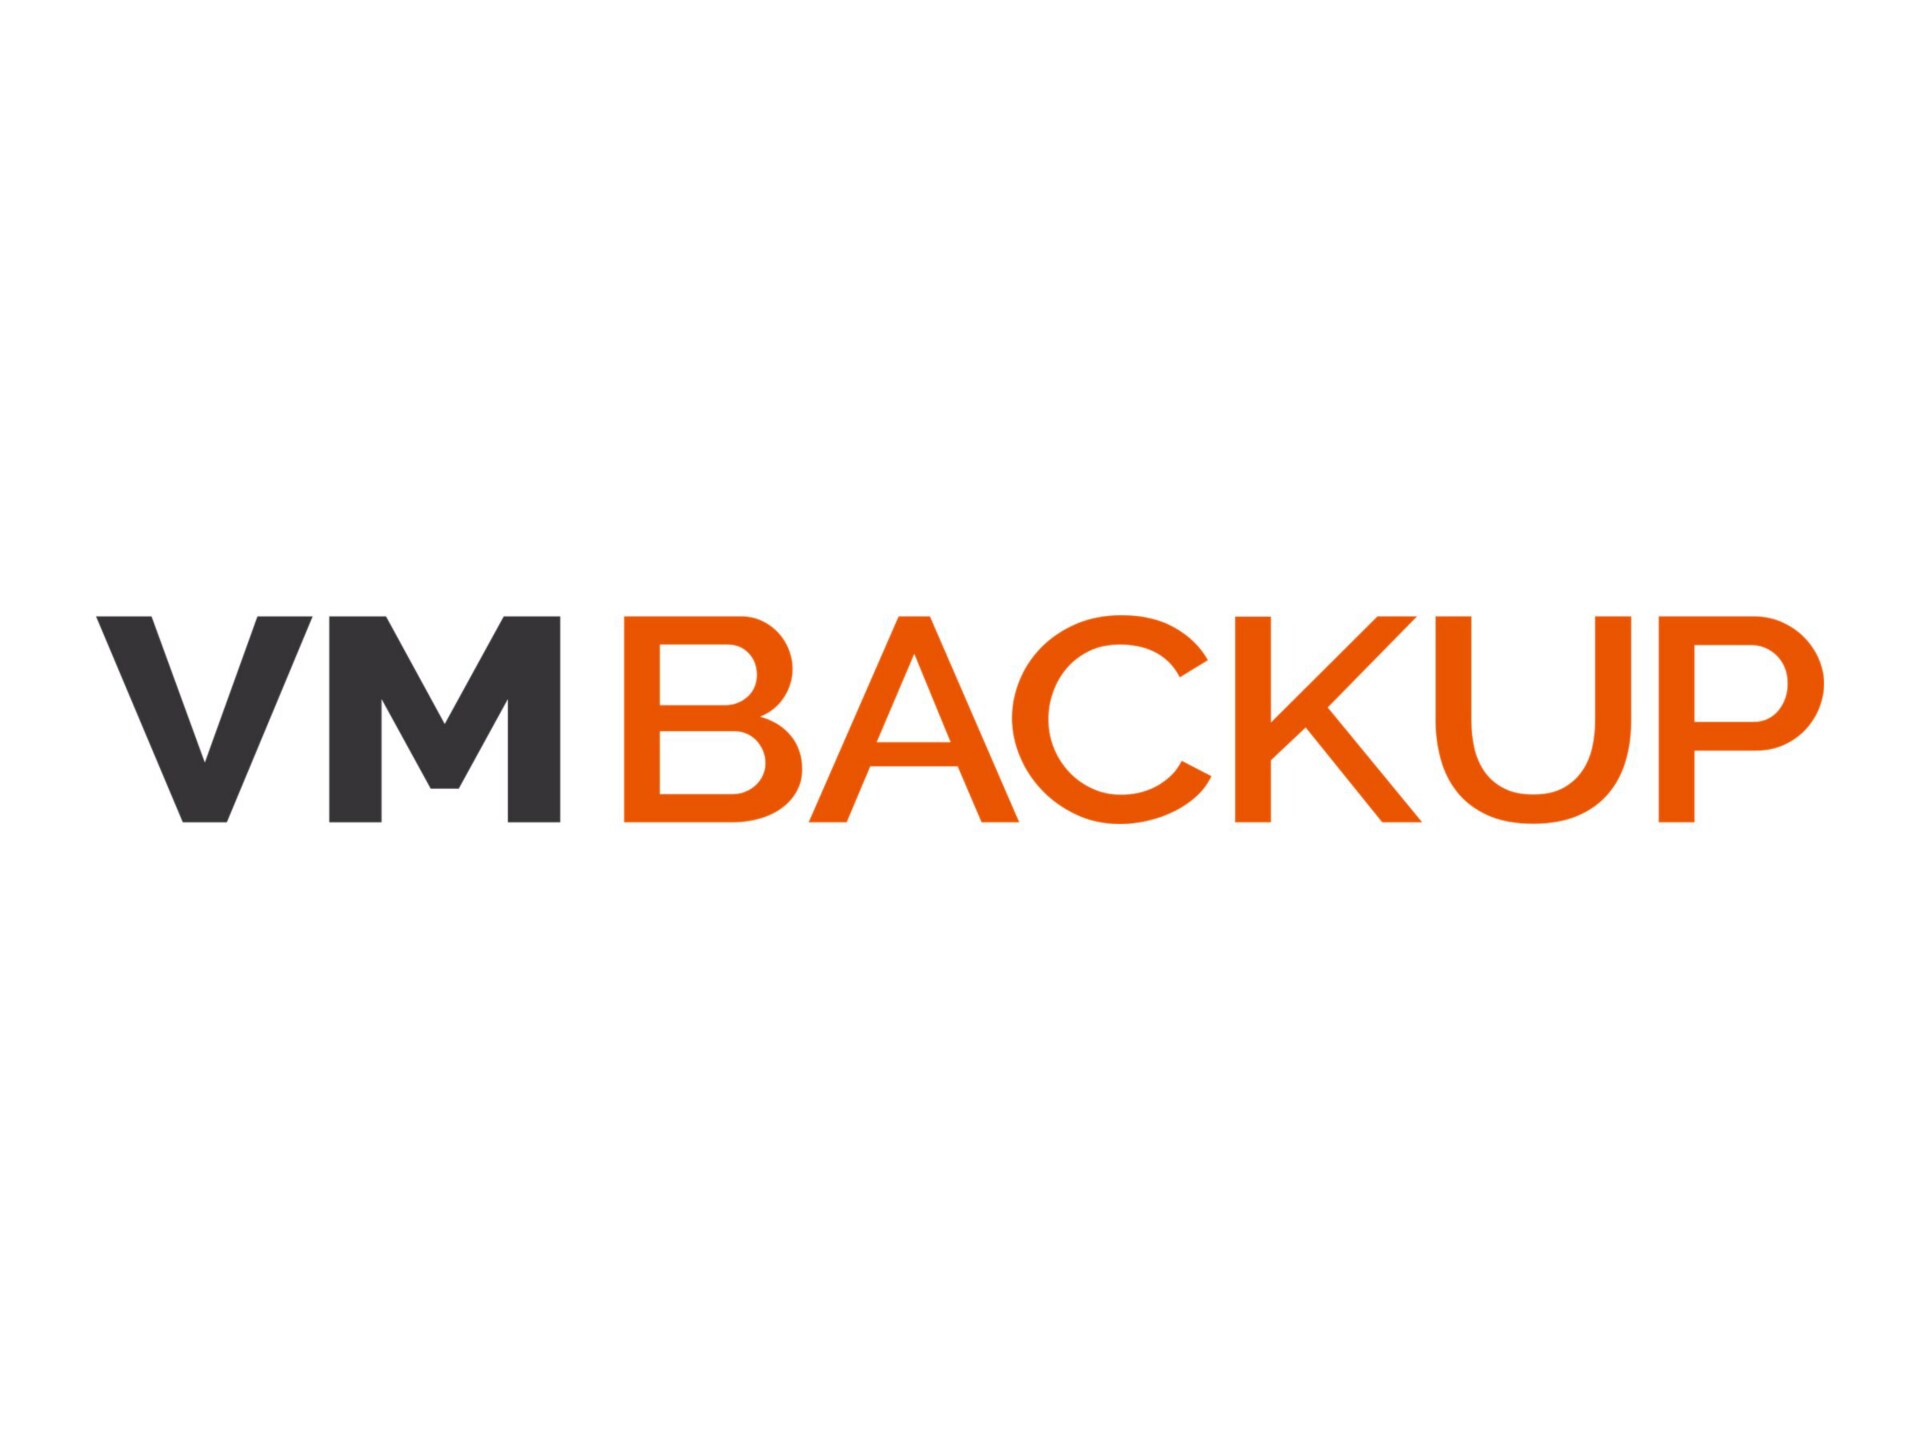 Altaro VM Backup for VMware Unlimited Plus Edition - license + 1 year Softw